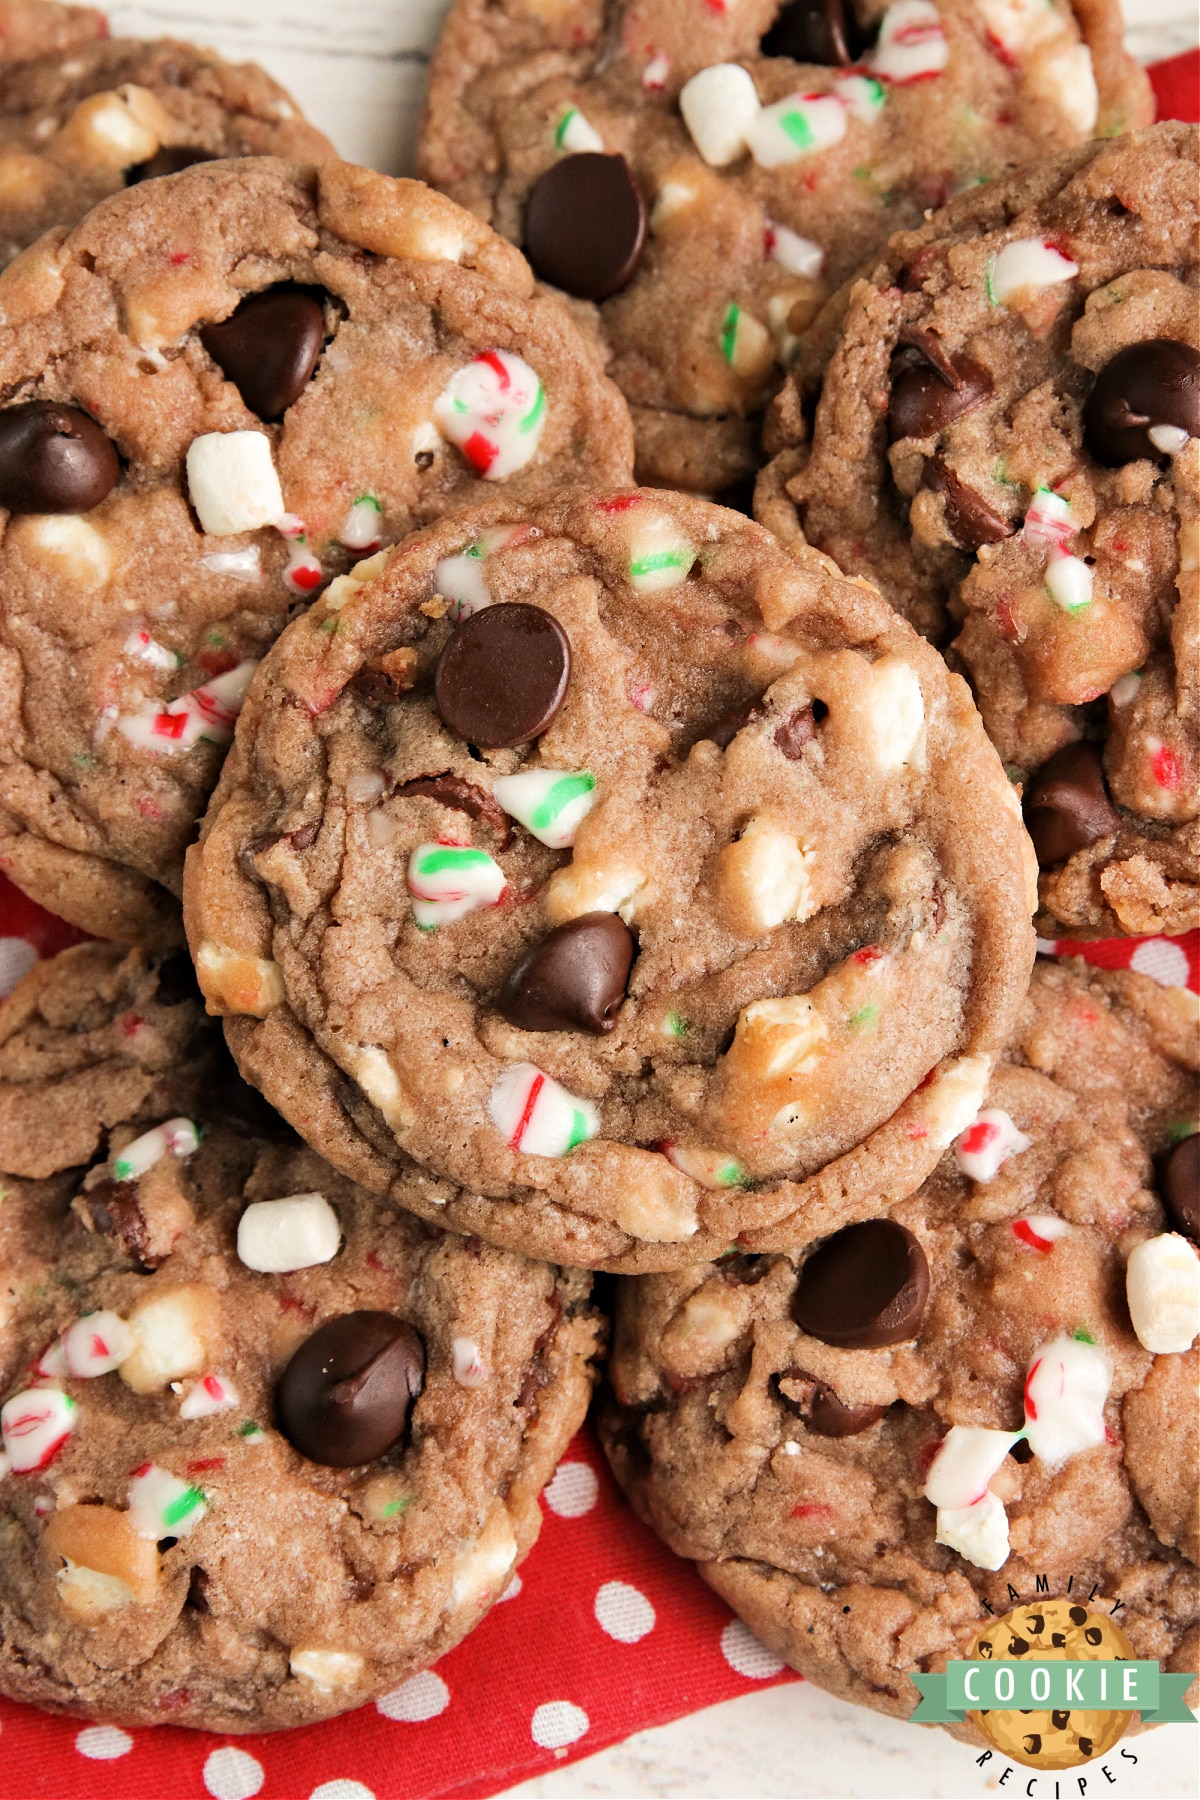 Hot Cocoa Cookies made with hot cocoa mix, chocolate chips, crushed candy canes and marshmallow bits. These hot chocolate cookies are simple to make and have all the flavors of a cup of your favorite hot cocoa! 